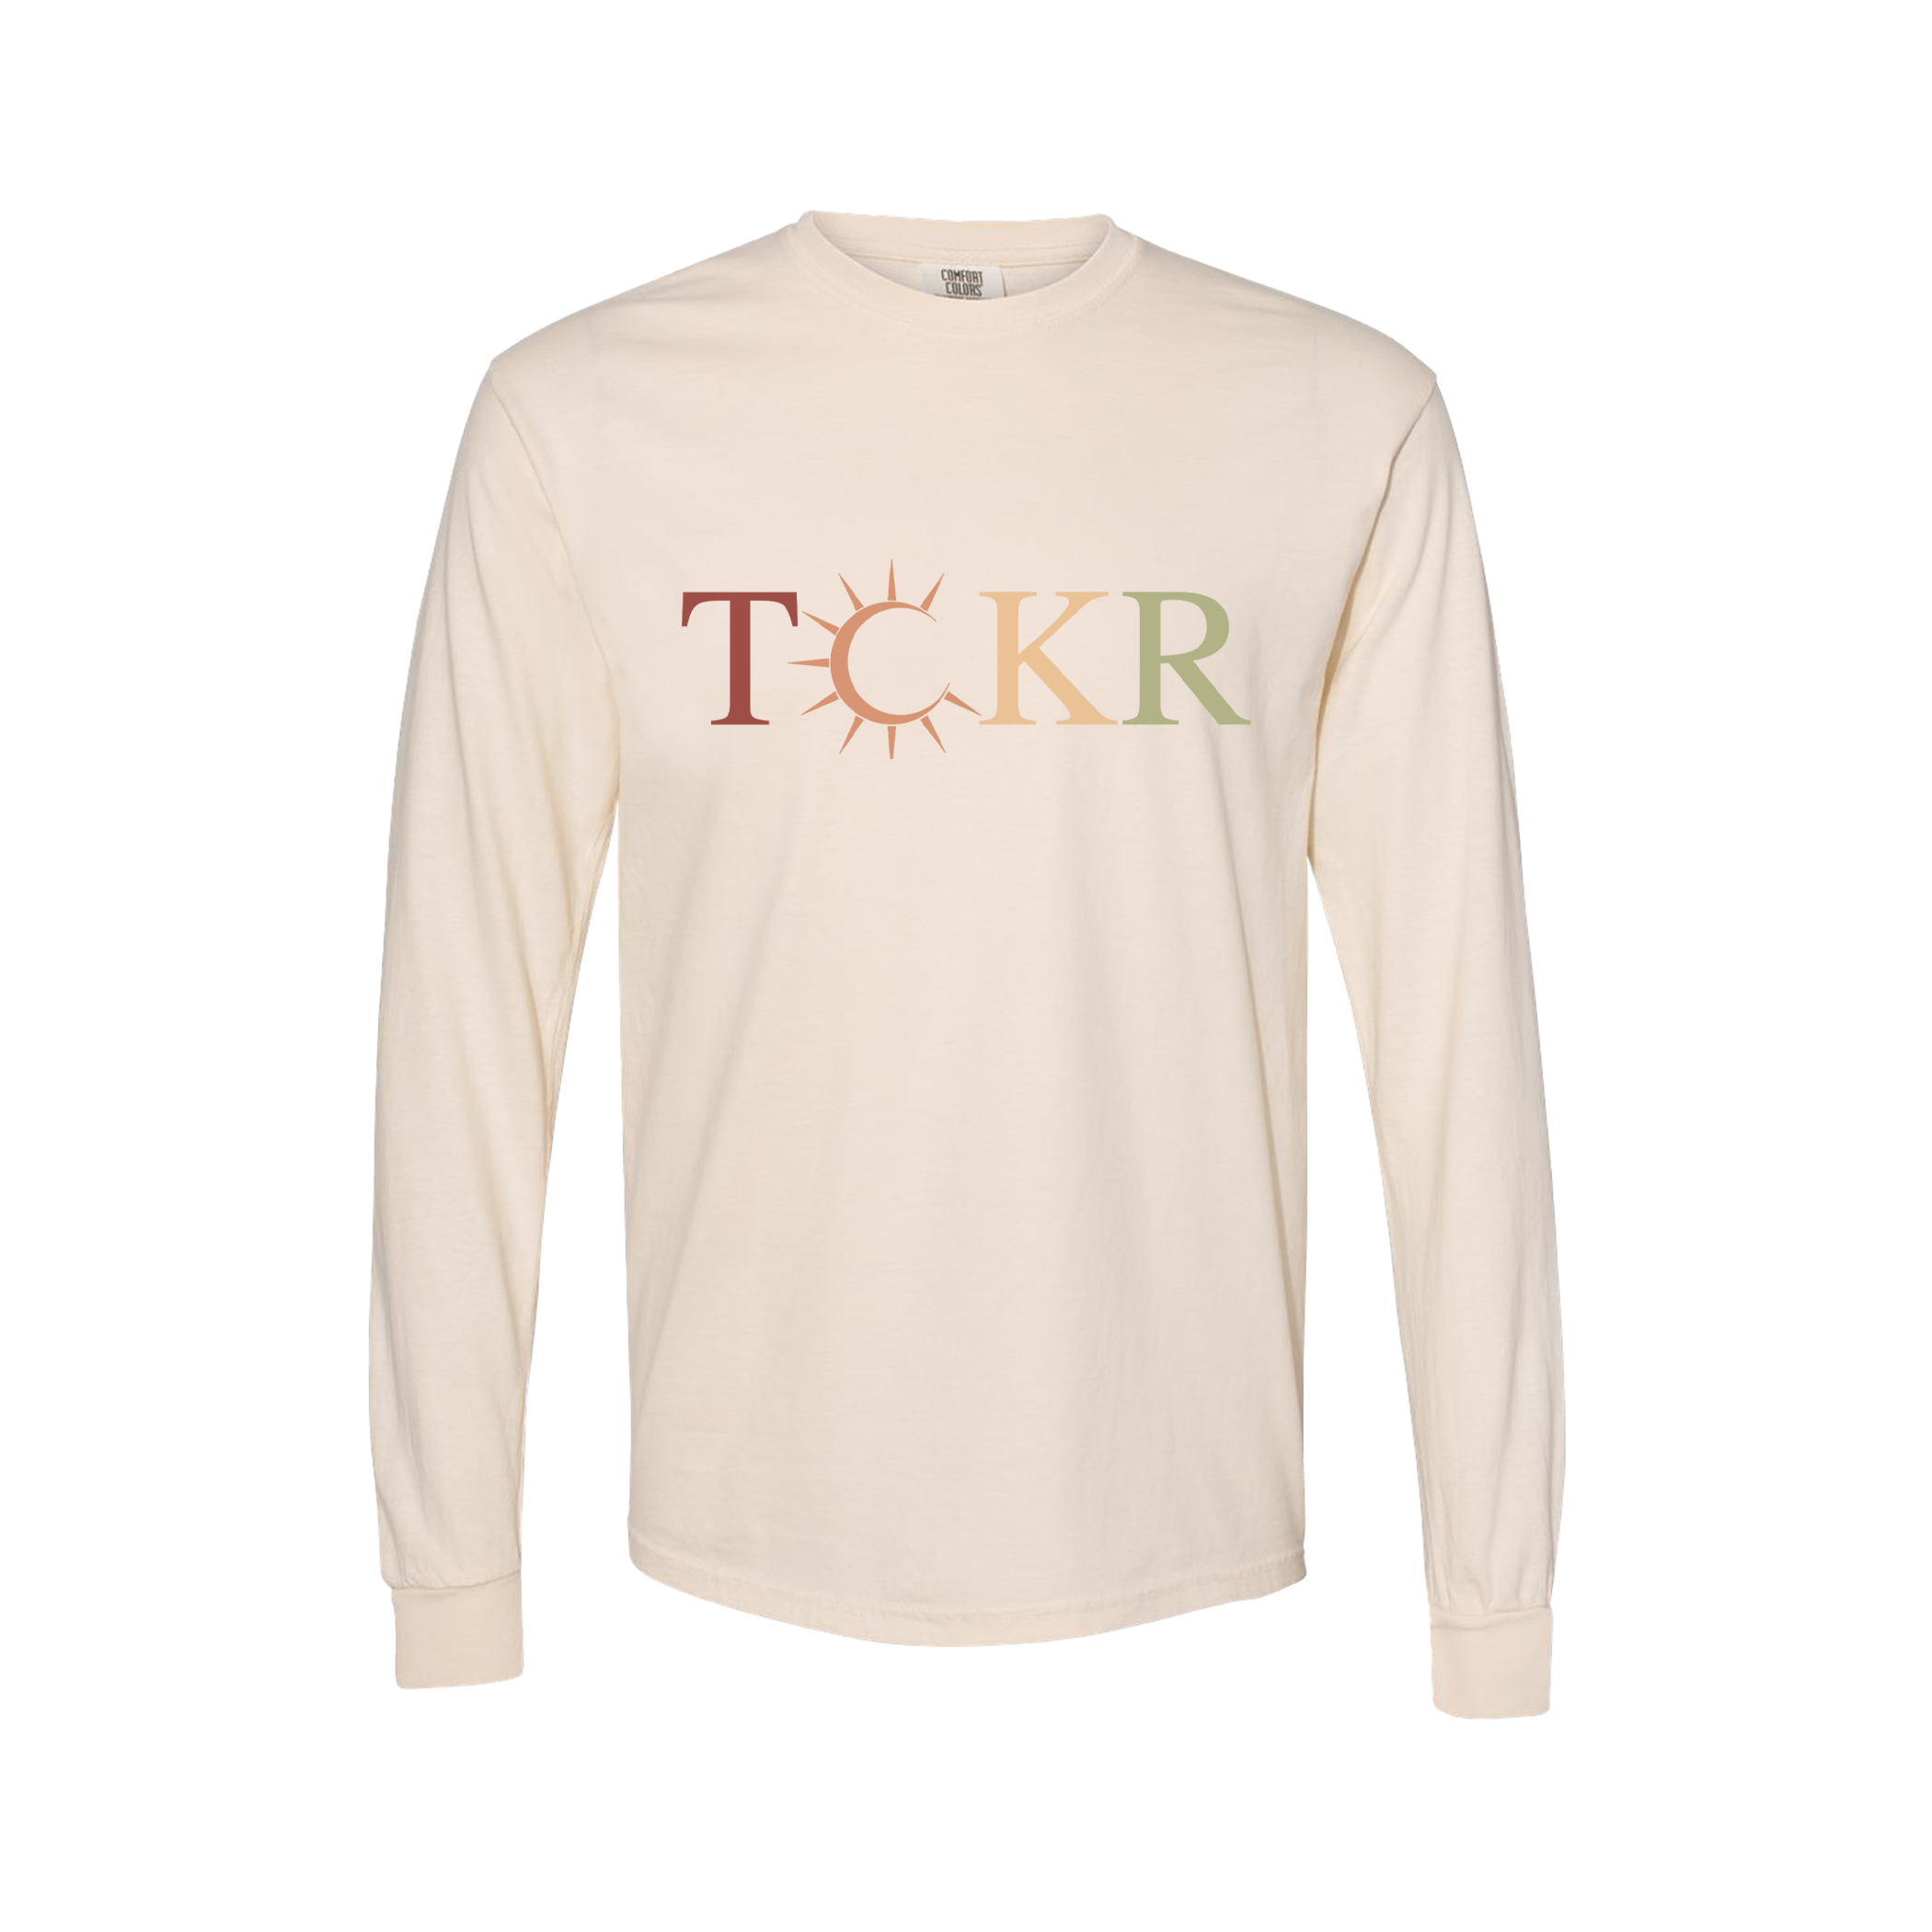 TCKR Embroidered Long Sleeve Shirt